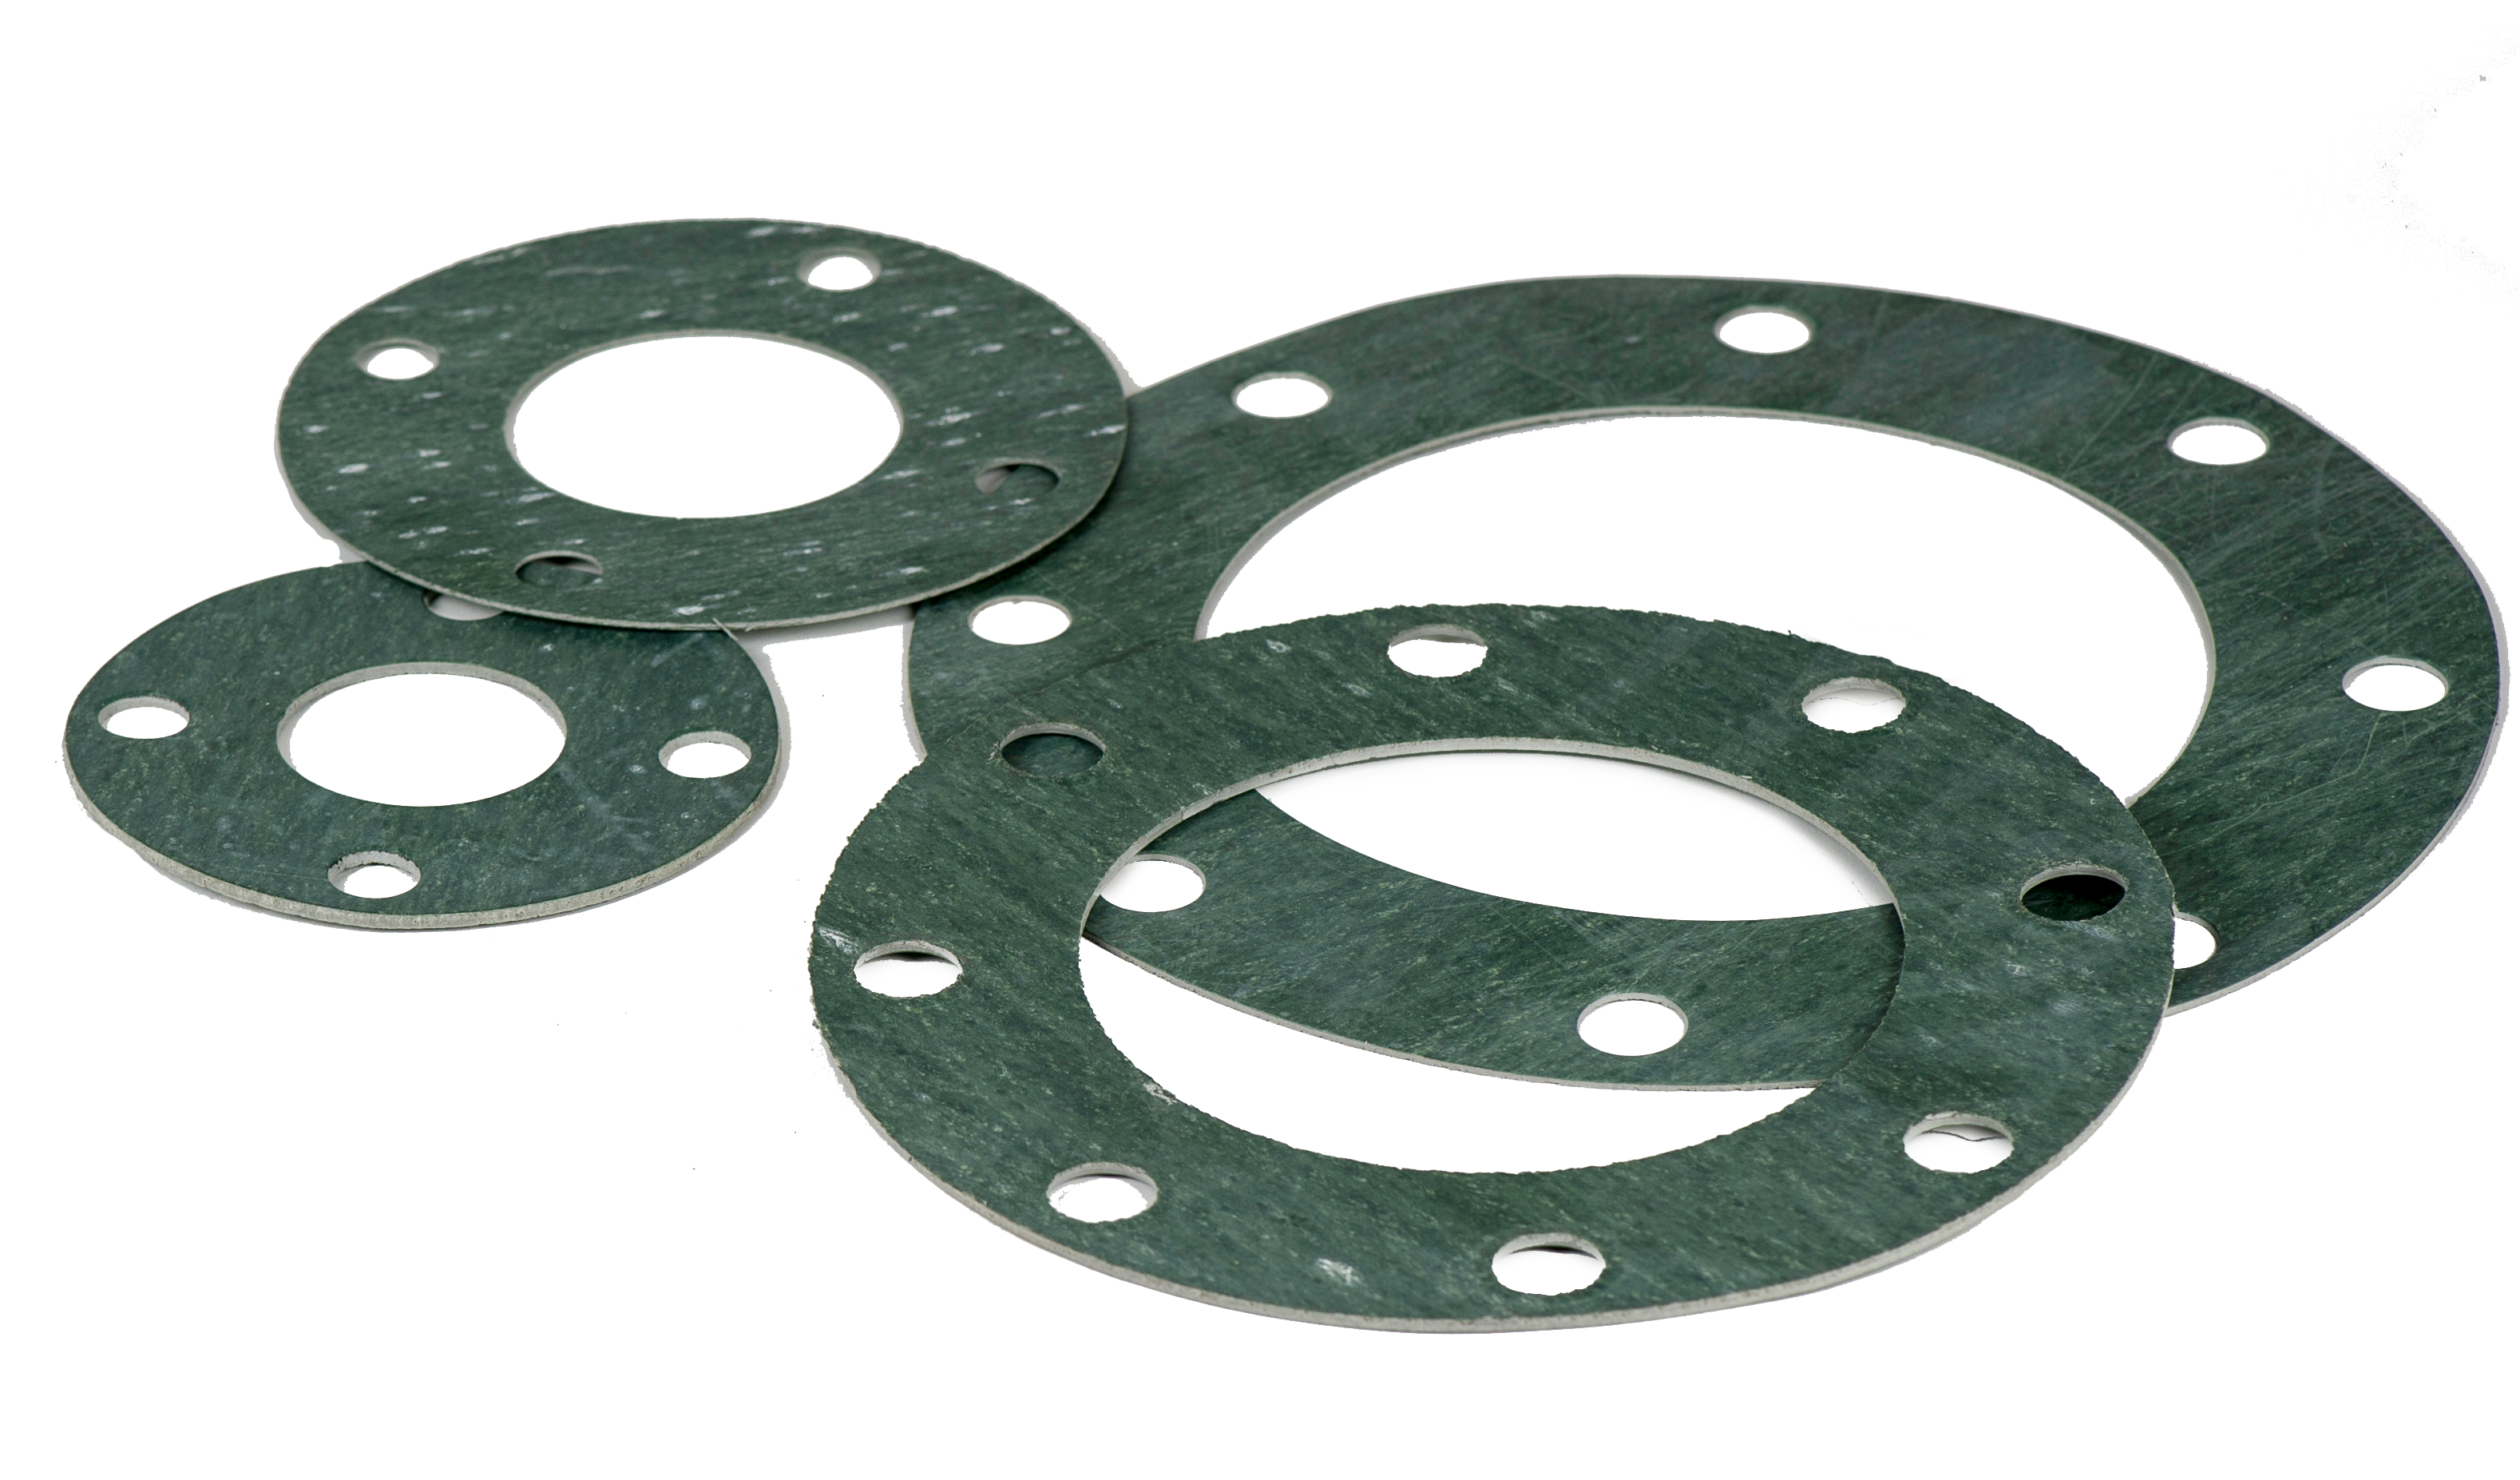 Class 150 1/16 Thick USA Sealing Ring Viton Rubber Flange Gasket for 10 Pipe